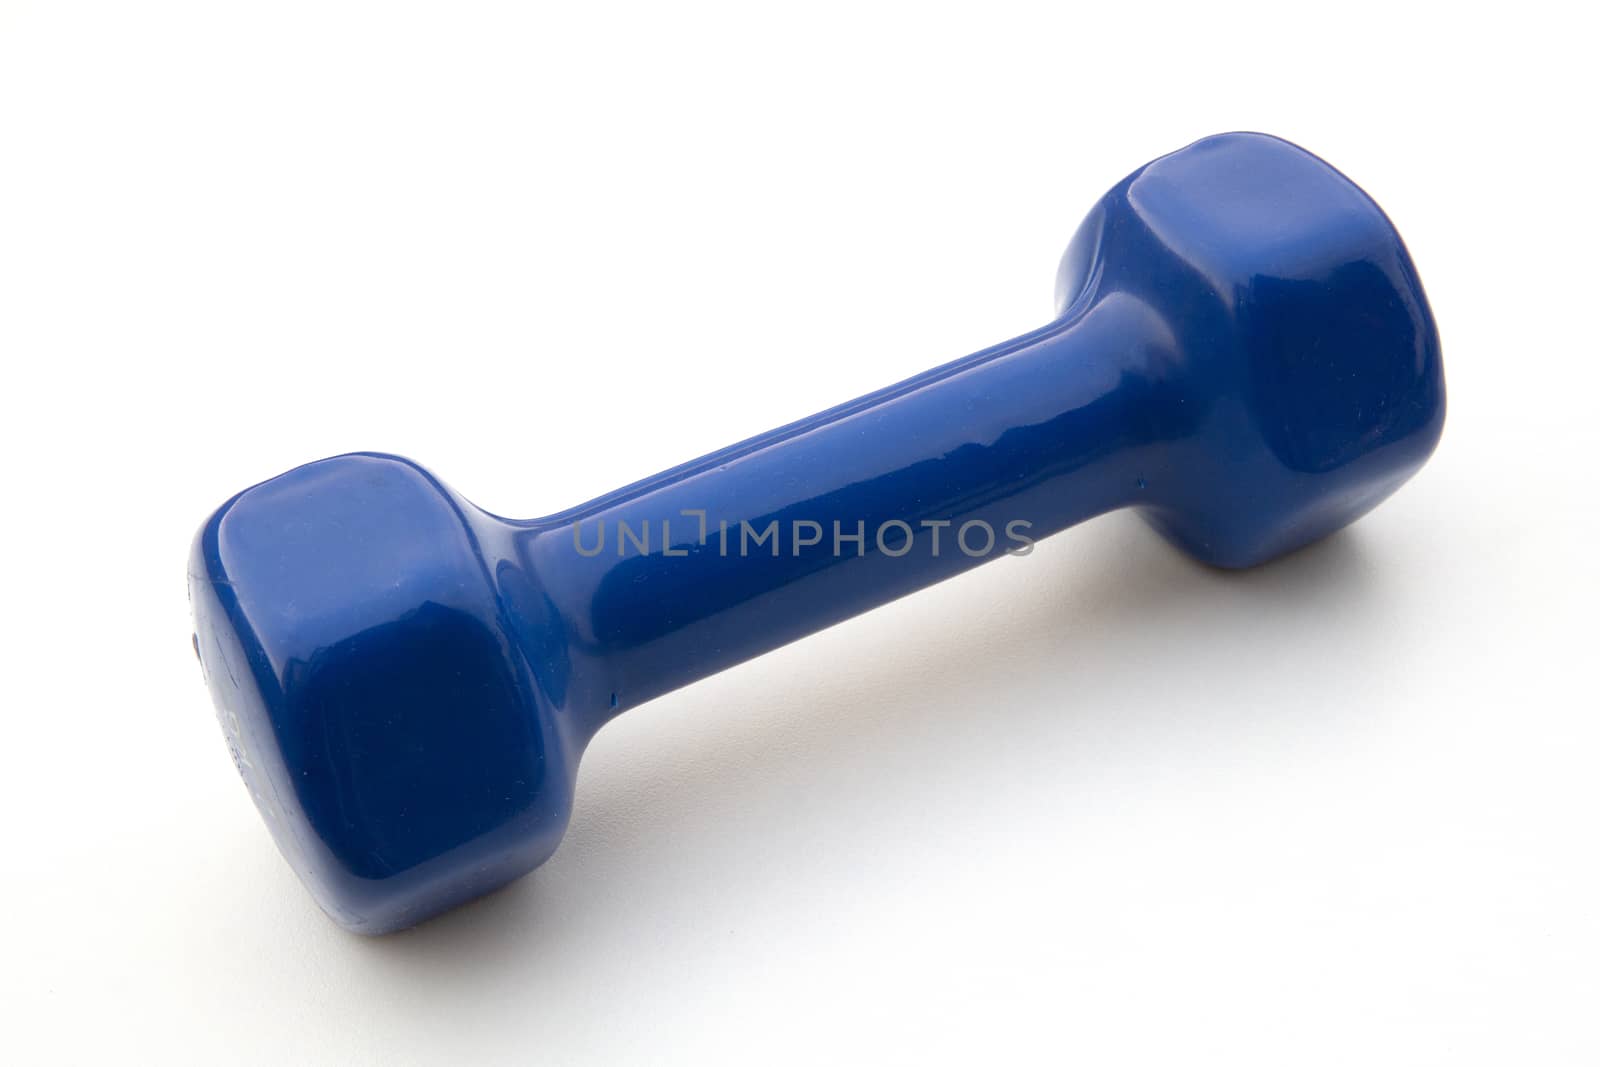 Blue Dumbell on white background weighing 2 kilograms by sonandonures